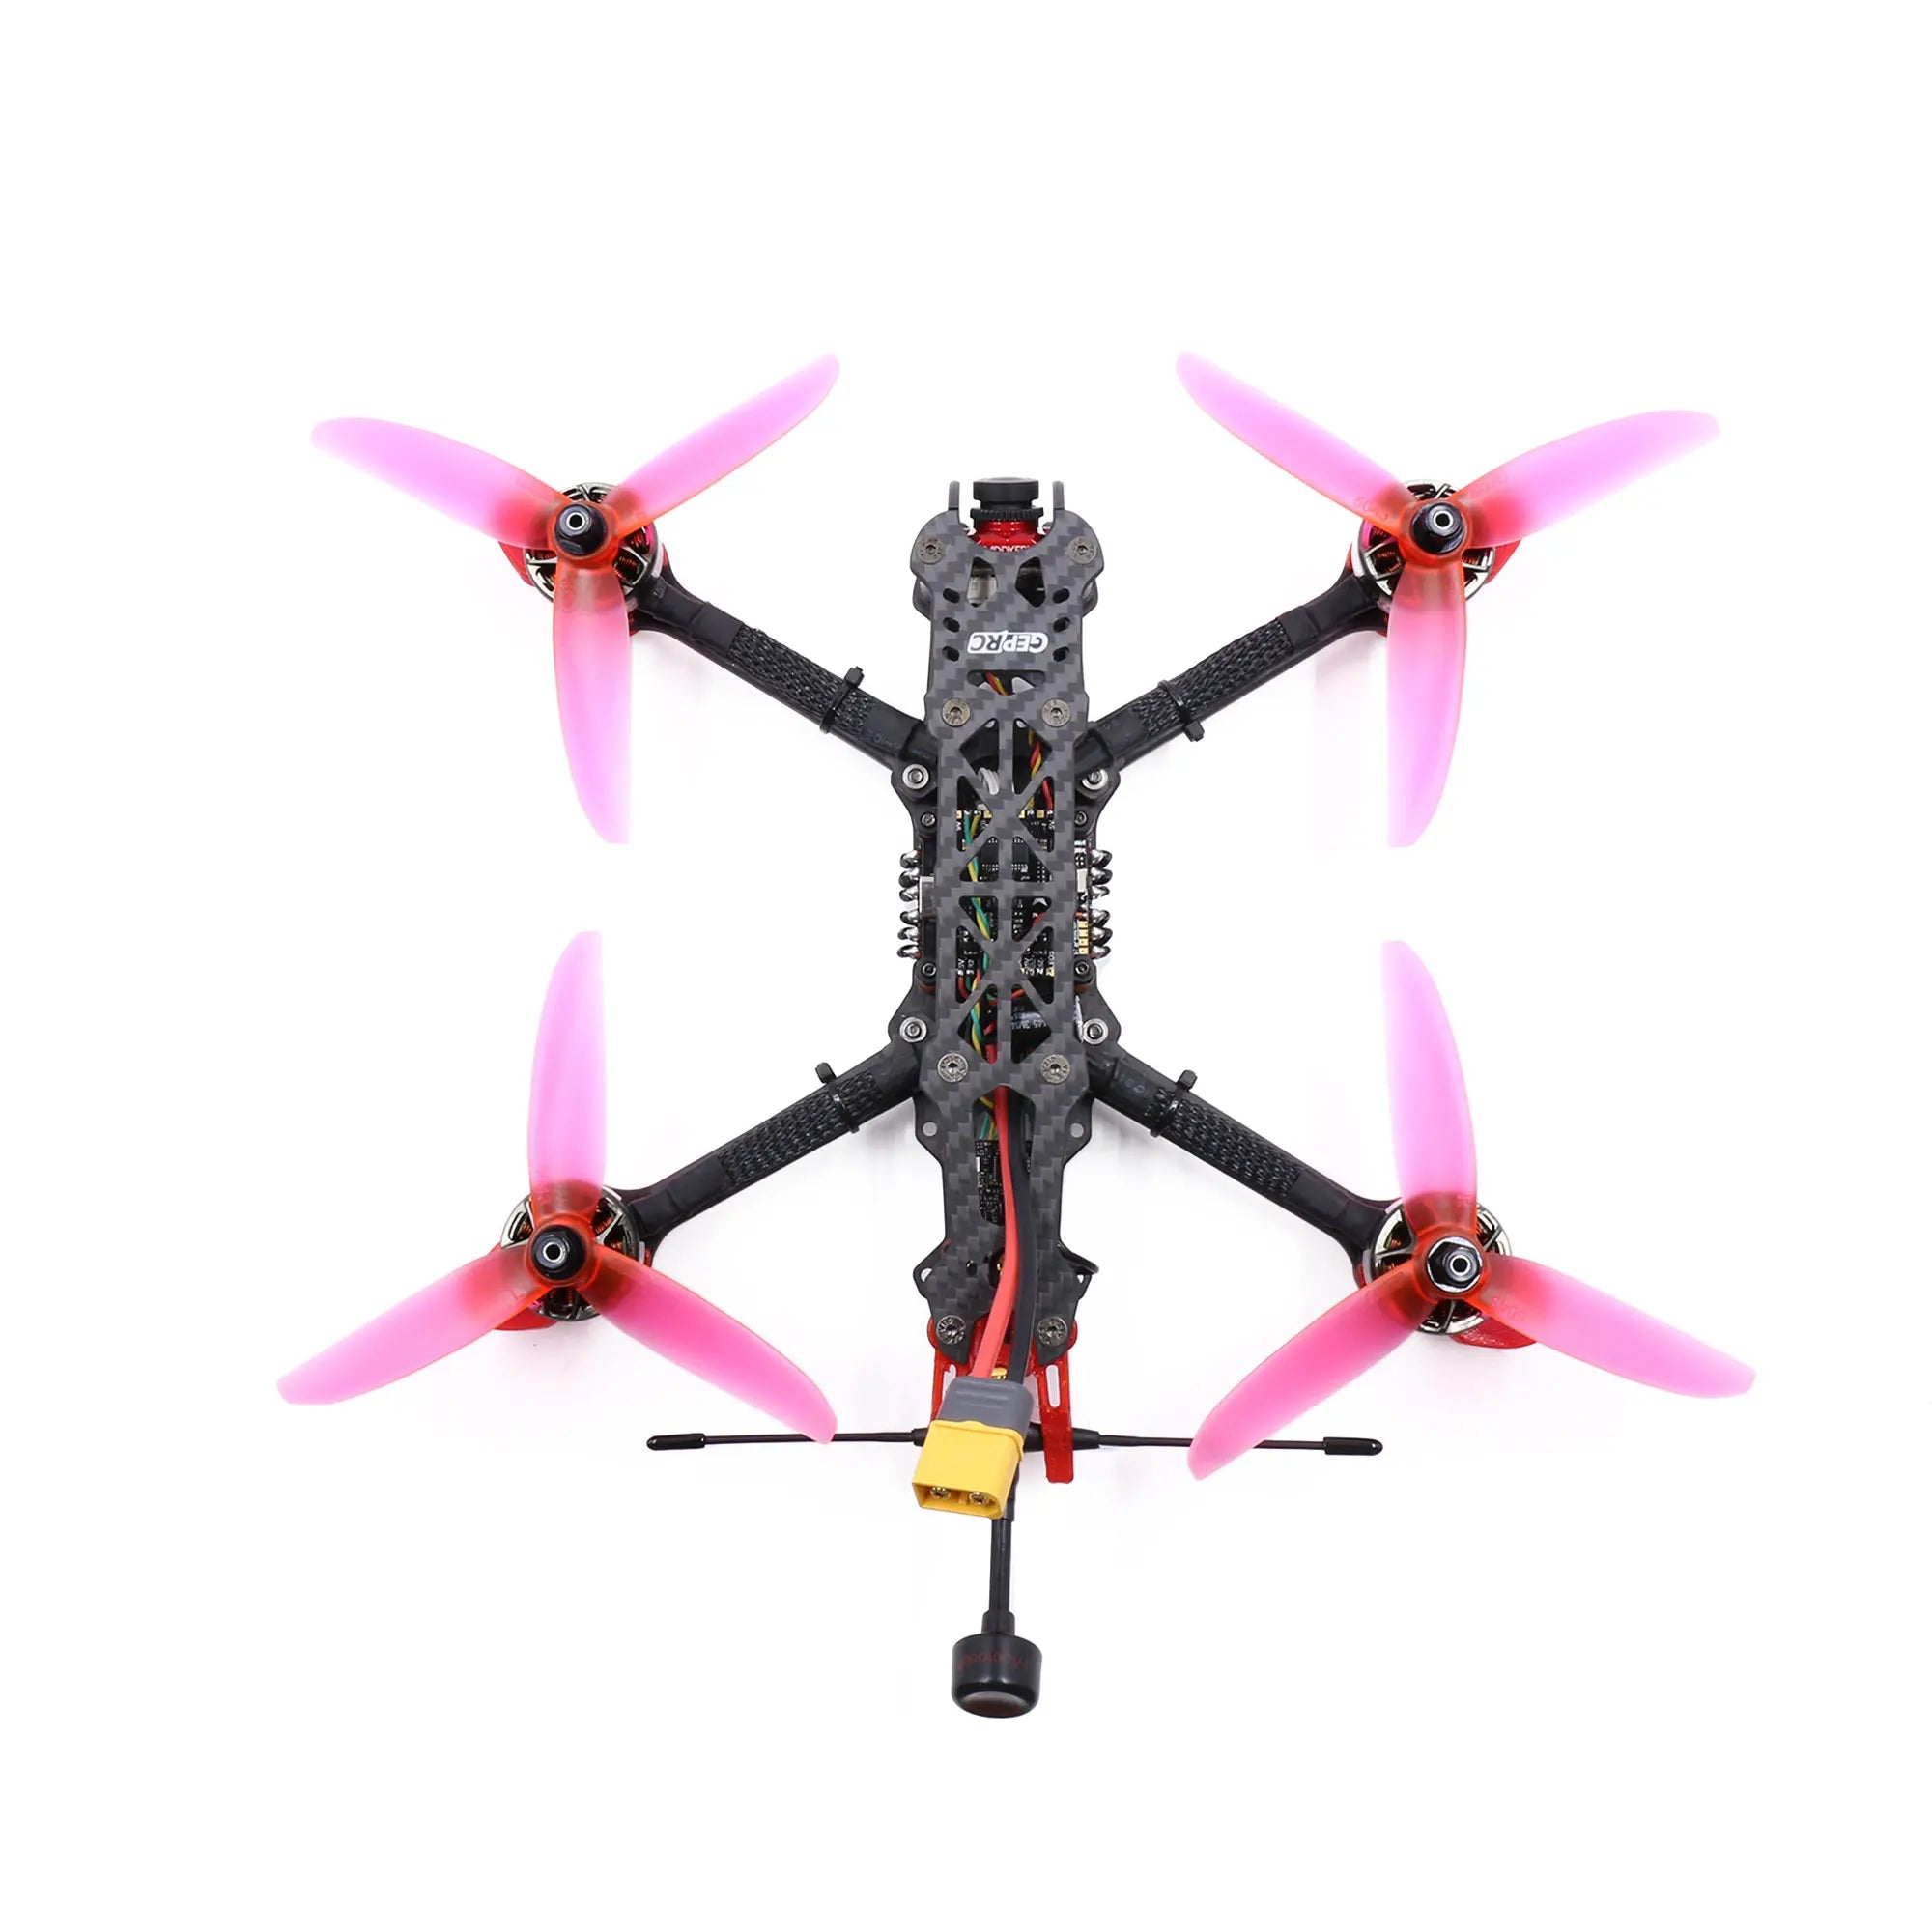 GEPRC MARK4 FPV Drone, GEPRC Momoda 5.8g antenna performs to the highest standard and refined radiation